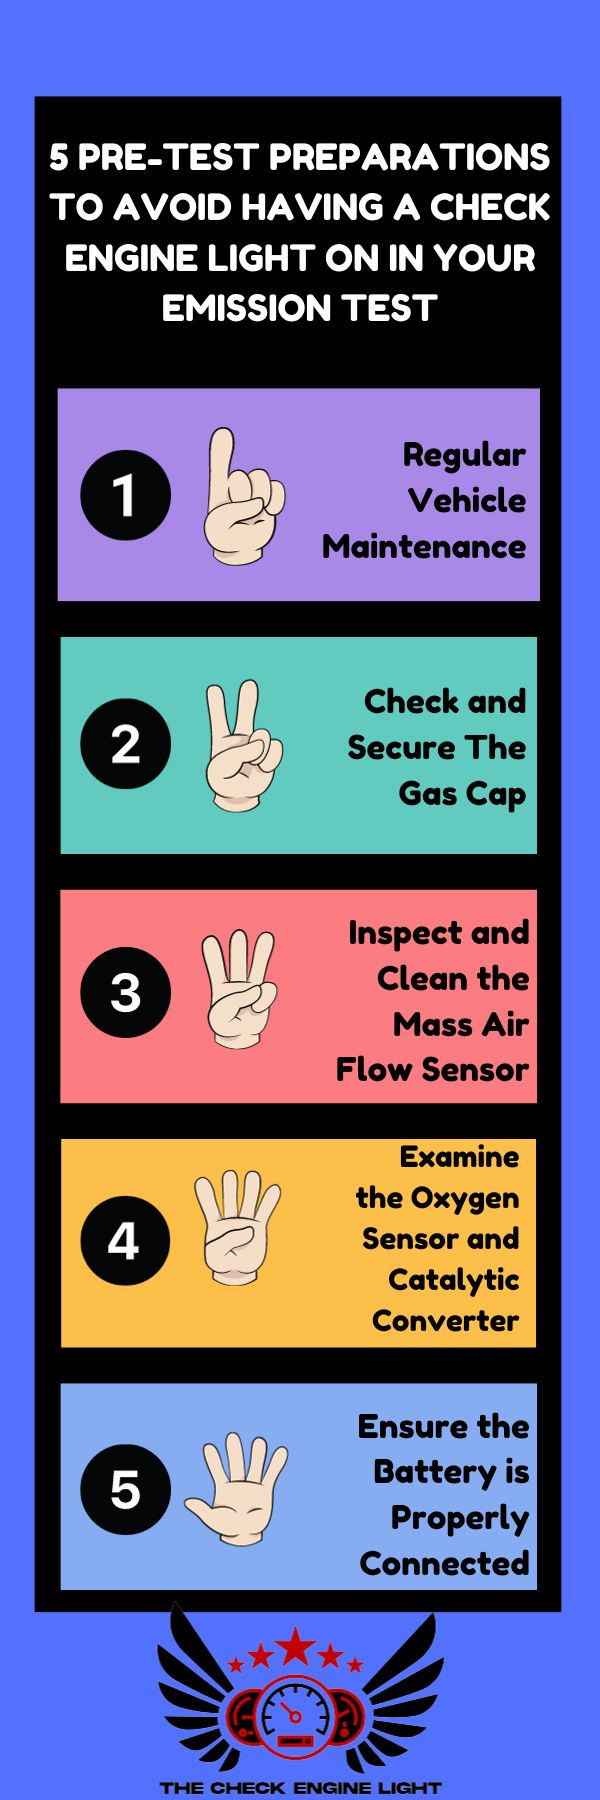 infographic for 5 Pre-Test Preparations to Avoid Having a Check Engine Light On in Your Emission Test